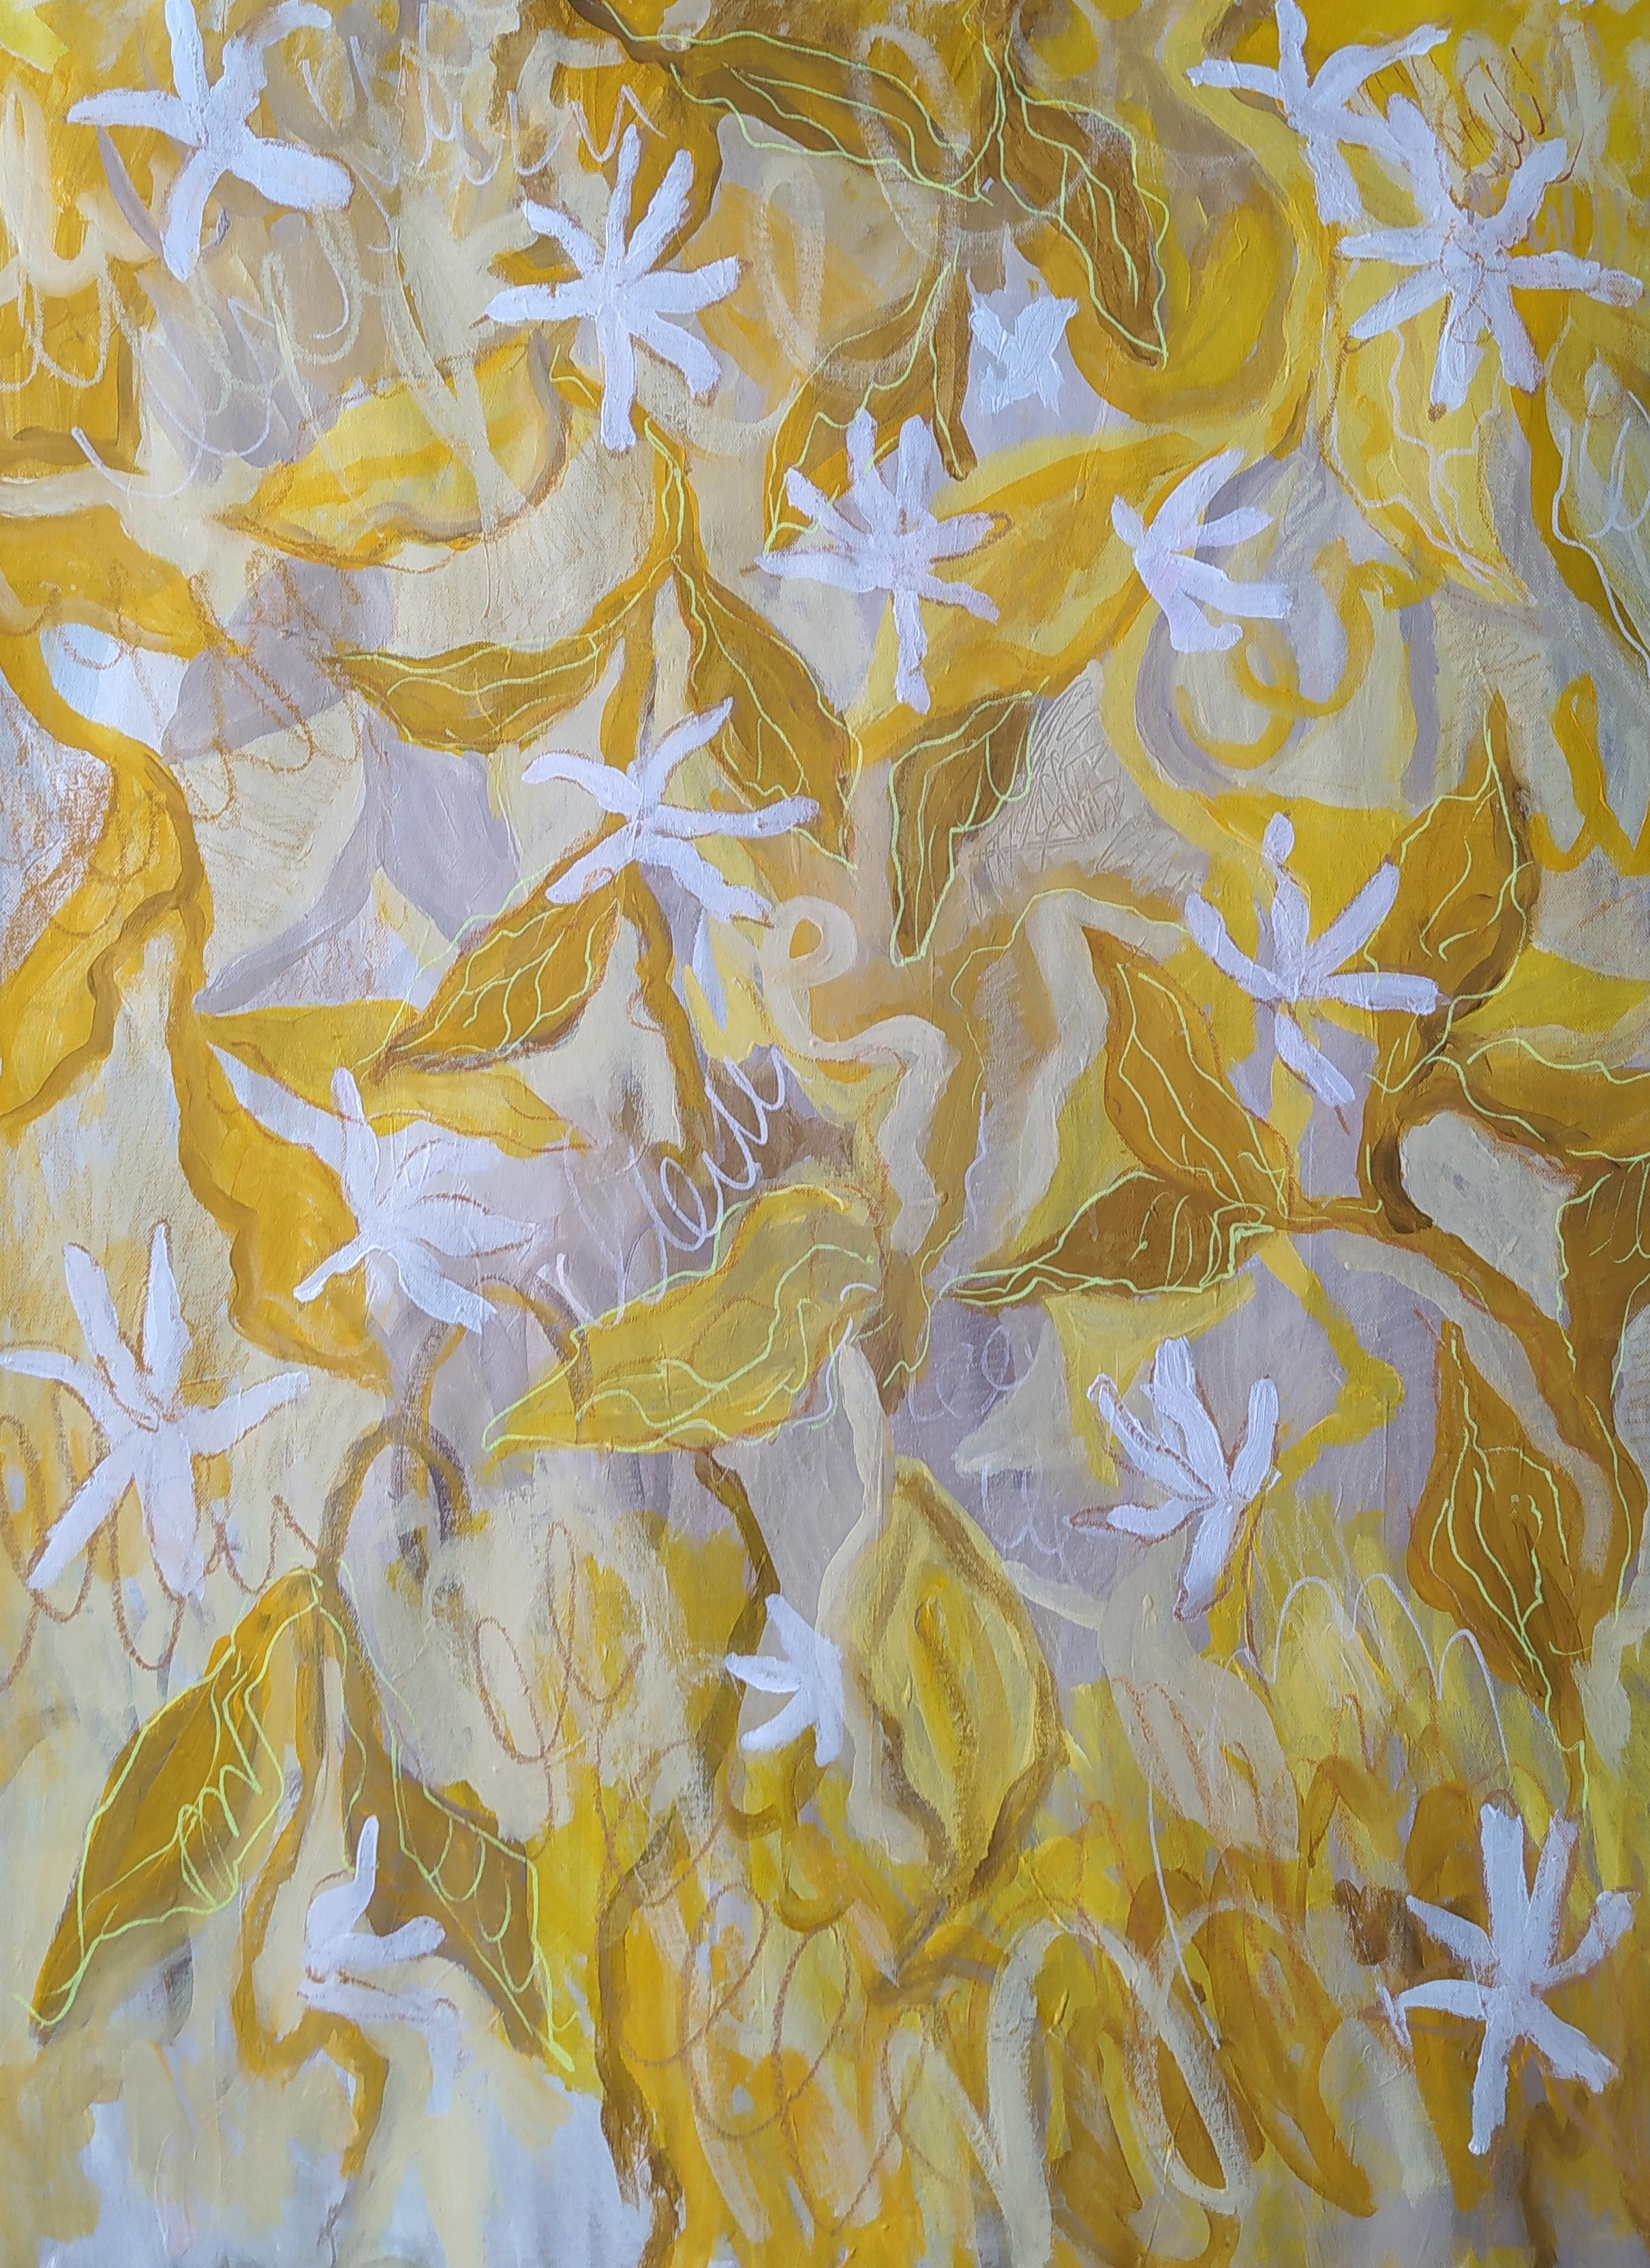 Fleur Abstract Painting - Banana leaves, 100x70cm